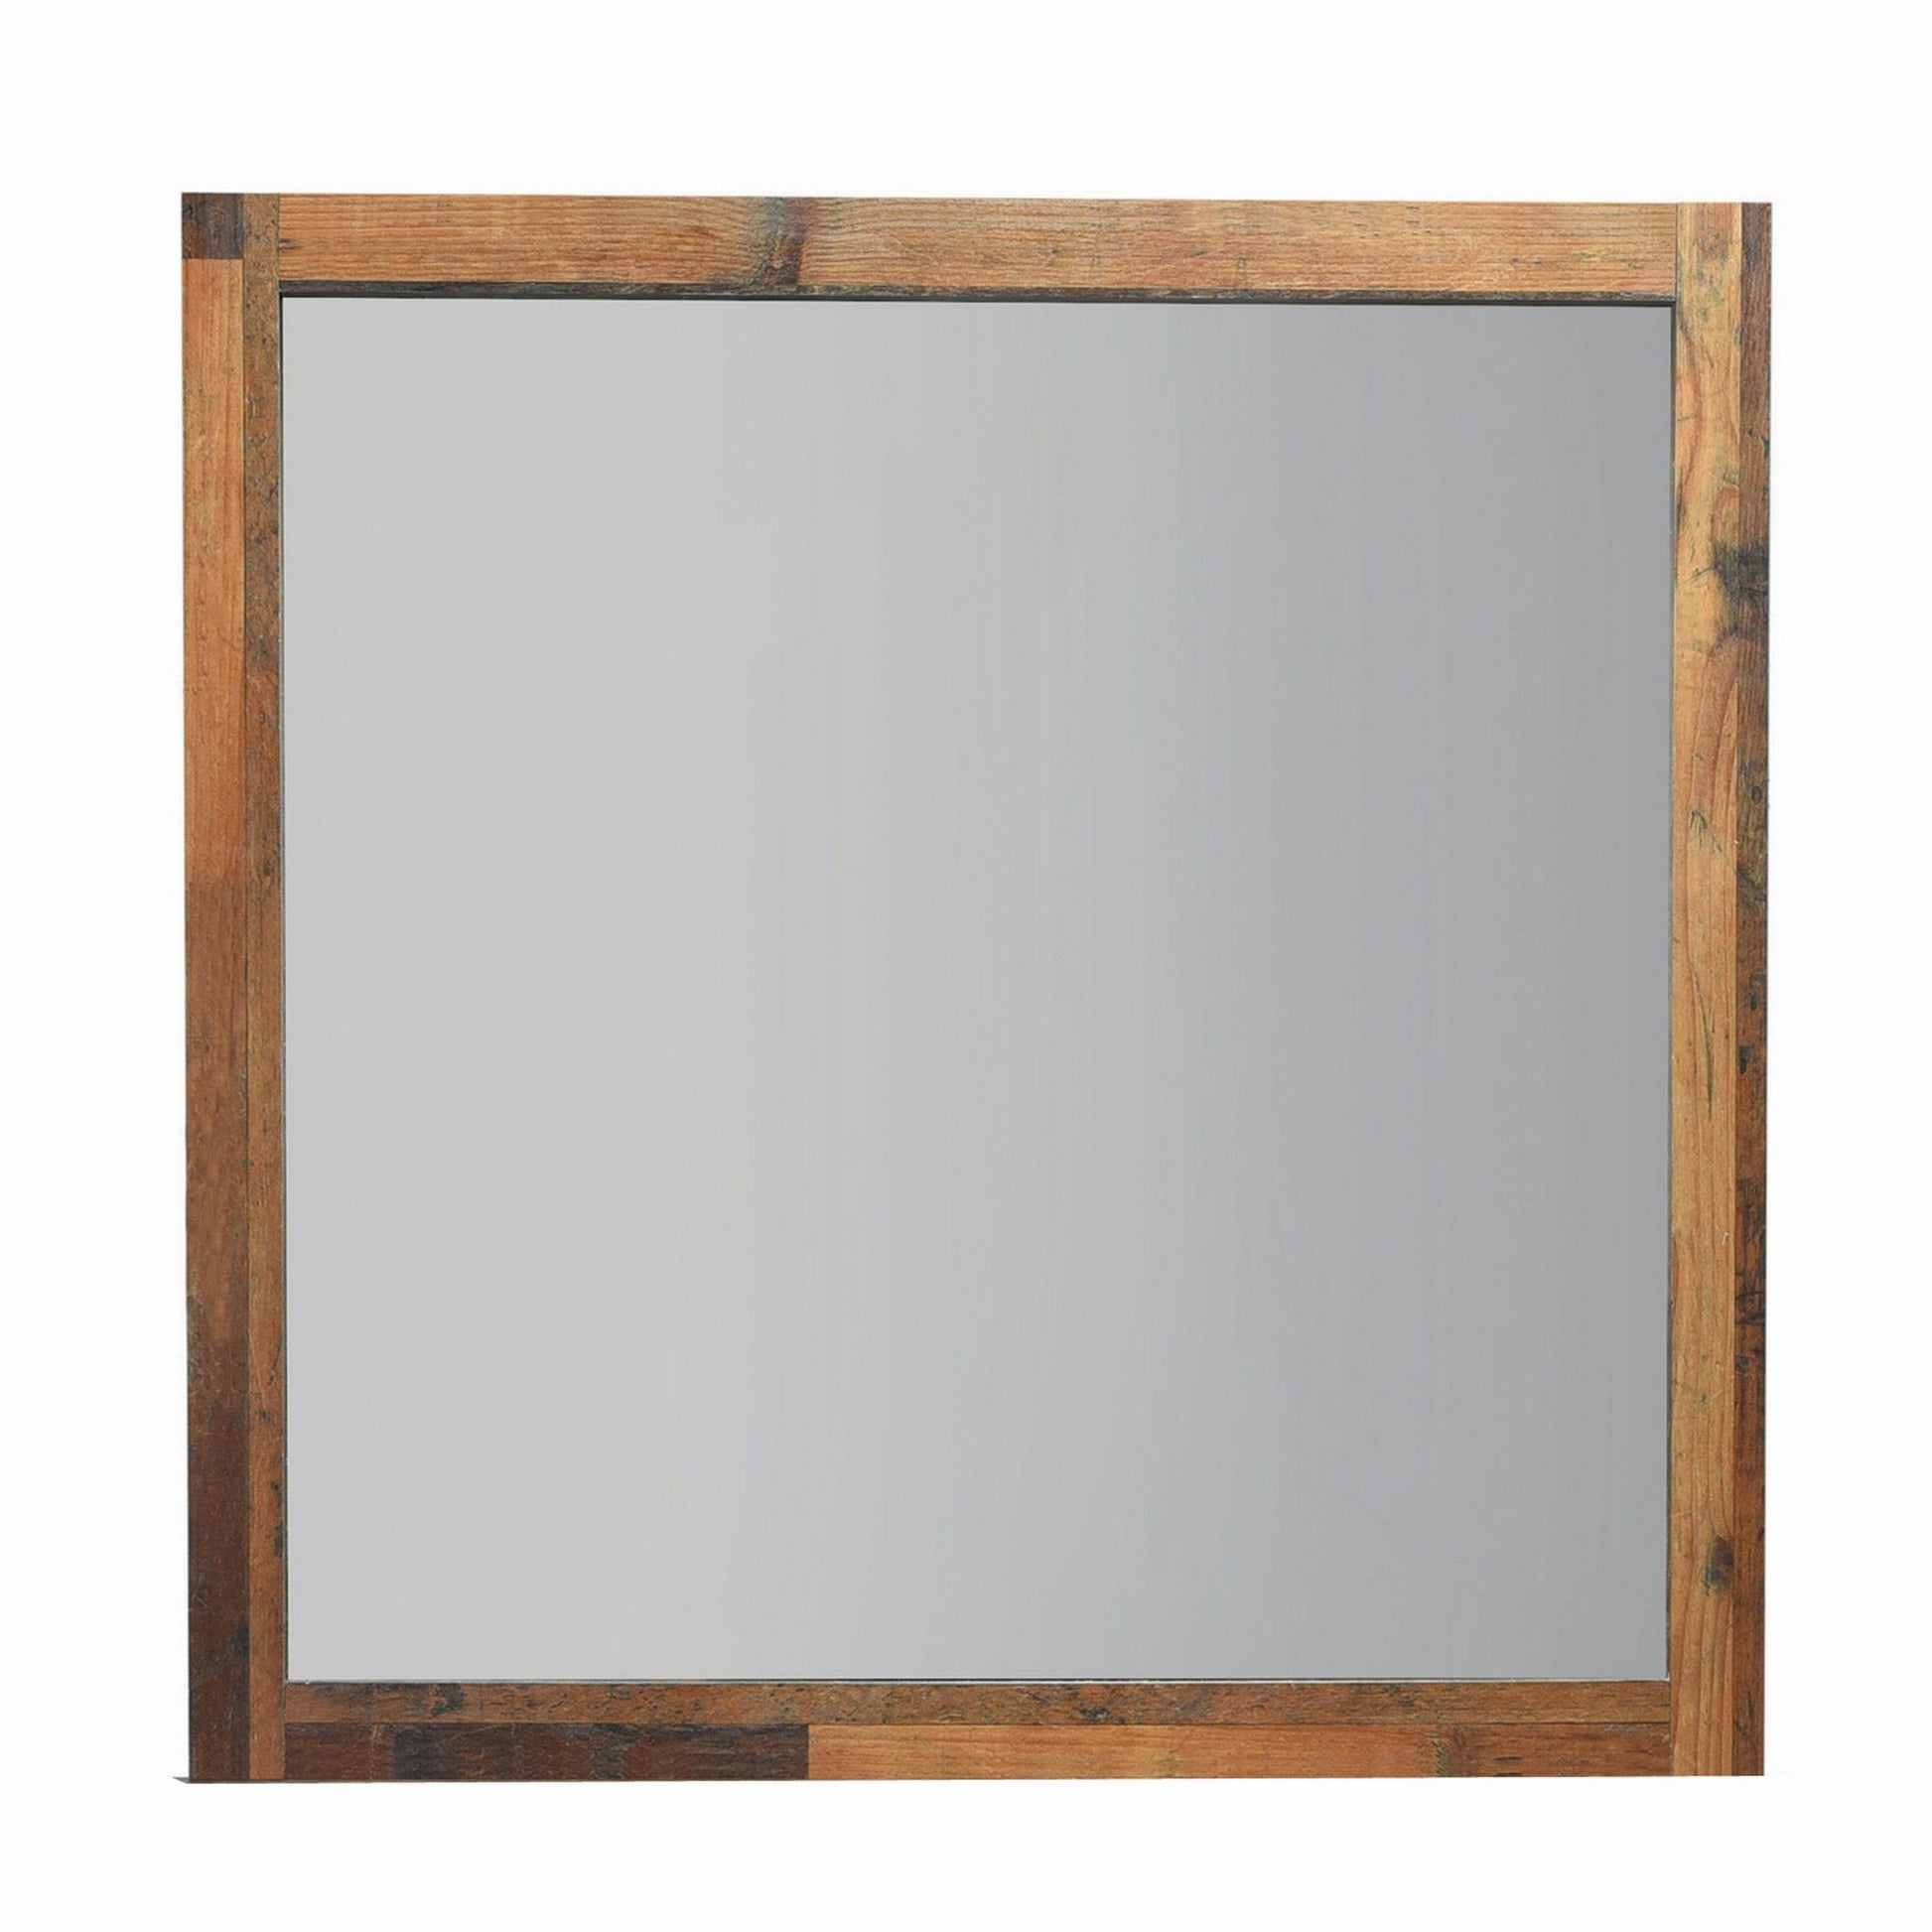 Benzara 39" Square Rustic Brown Wooden Framed Wall Mirror